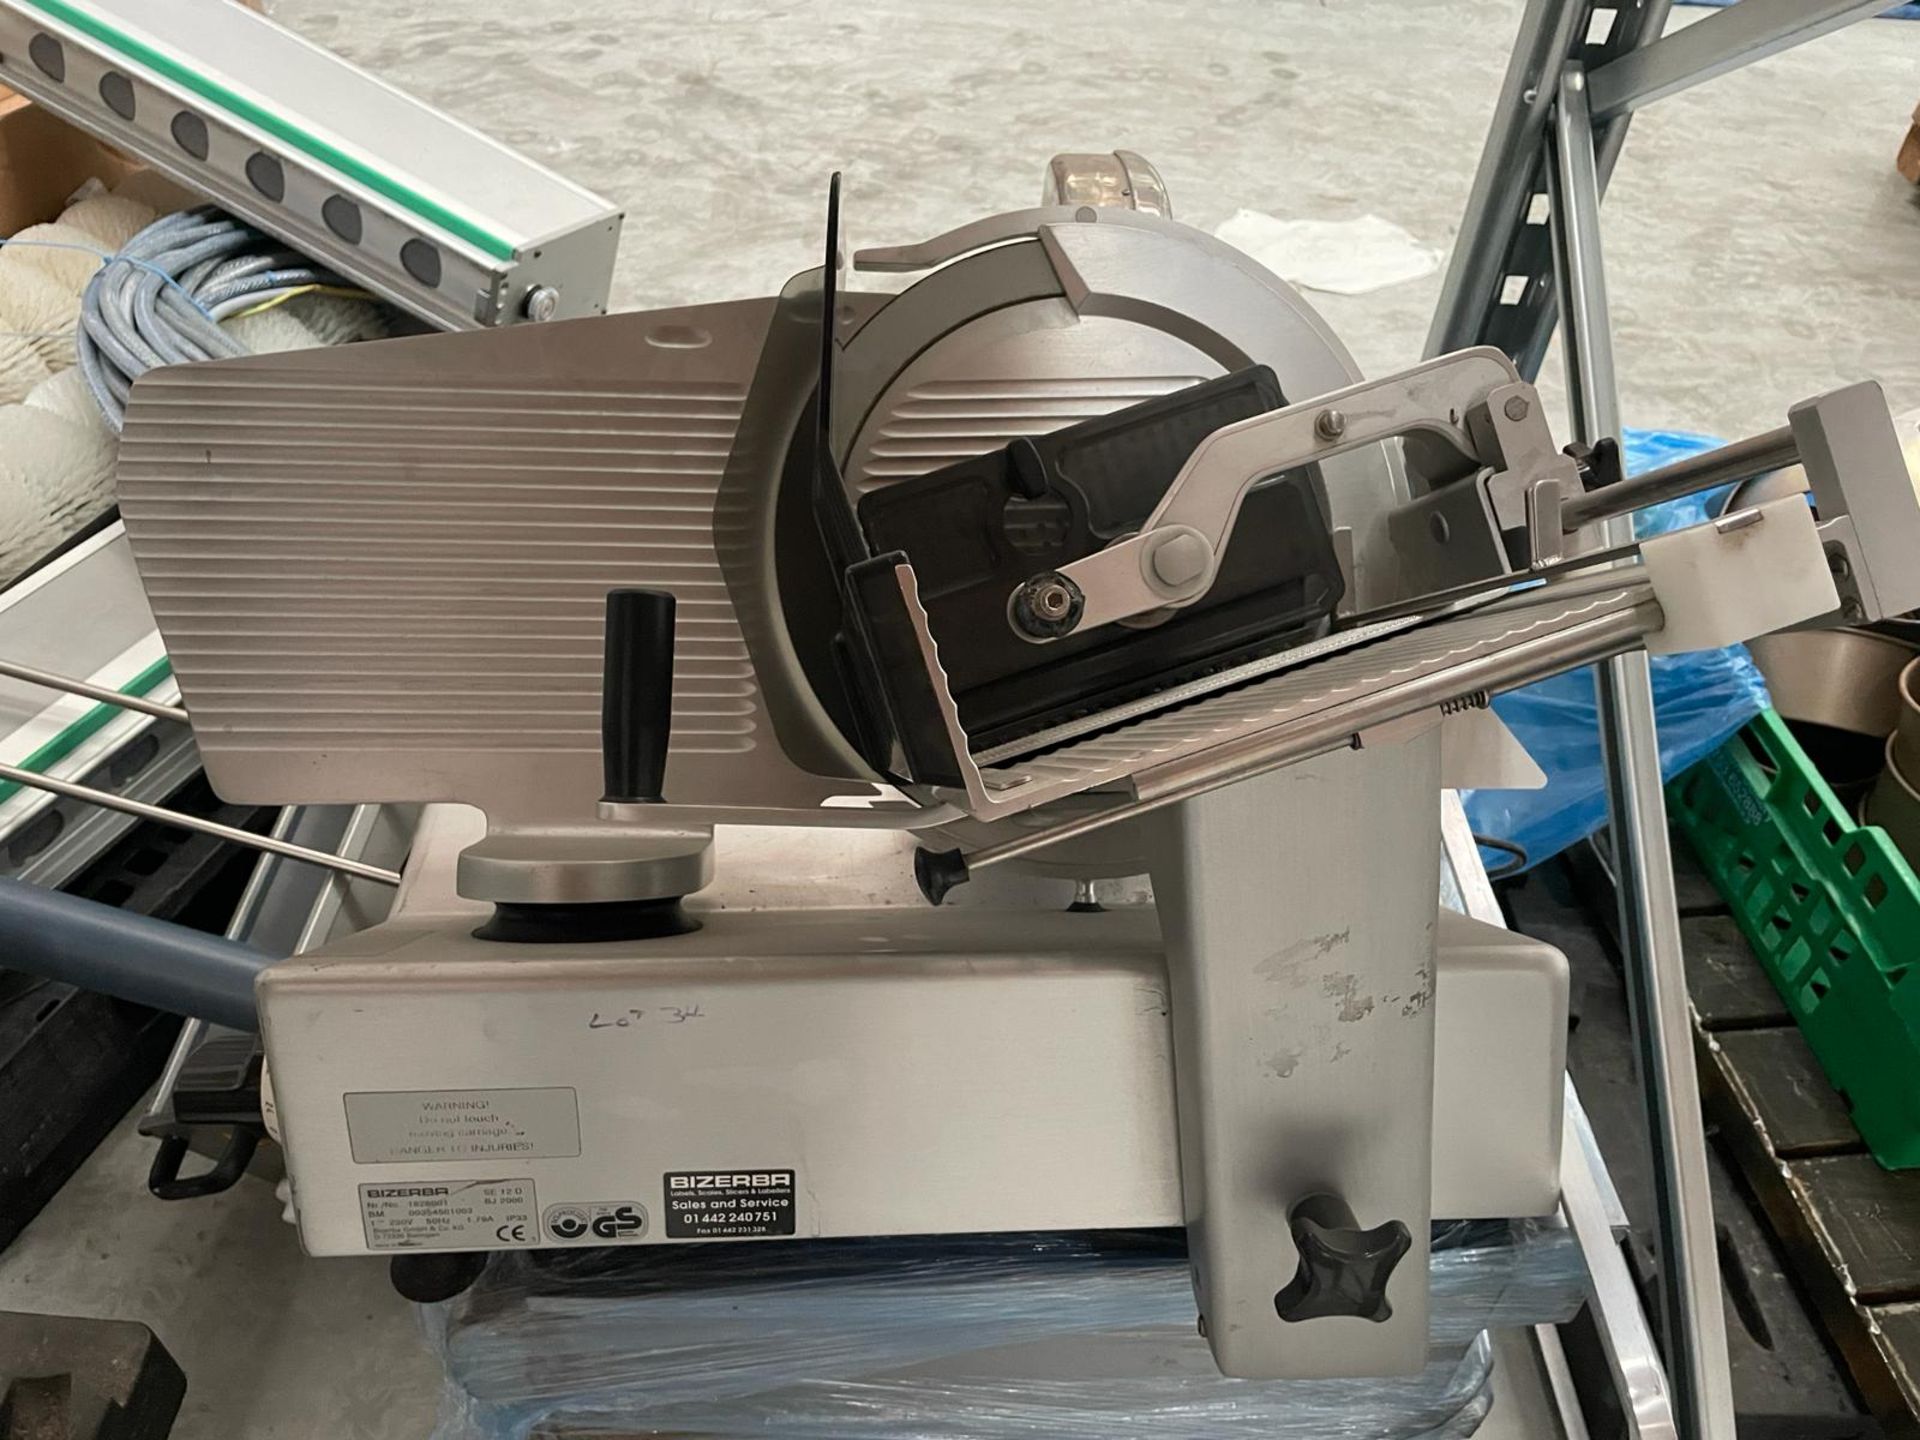 Bizerba SE 12D Meat slicer. Please note this lot is located at Unit 29, Ridge Way, Iver, Bucks,